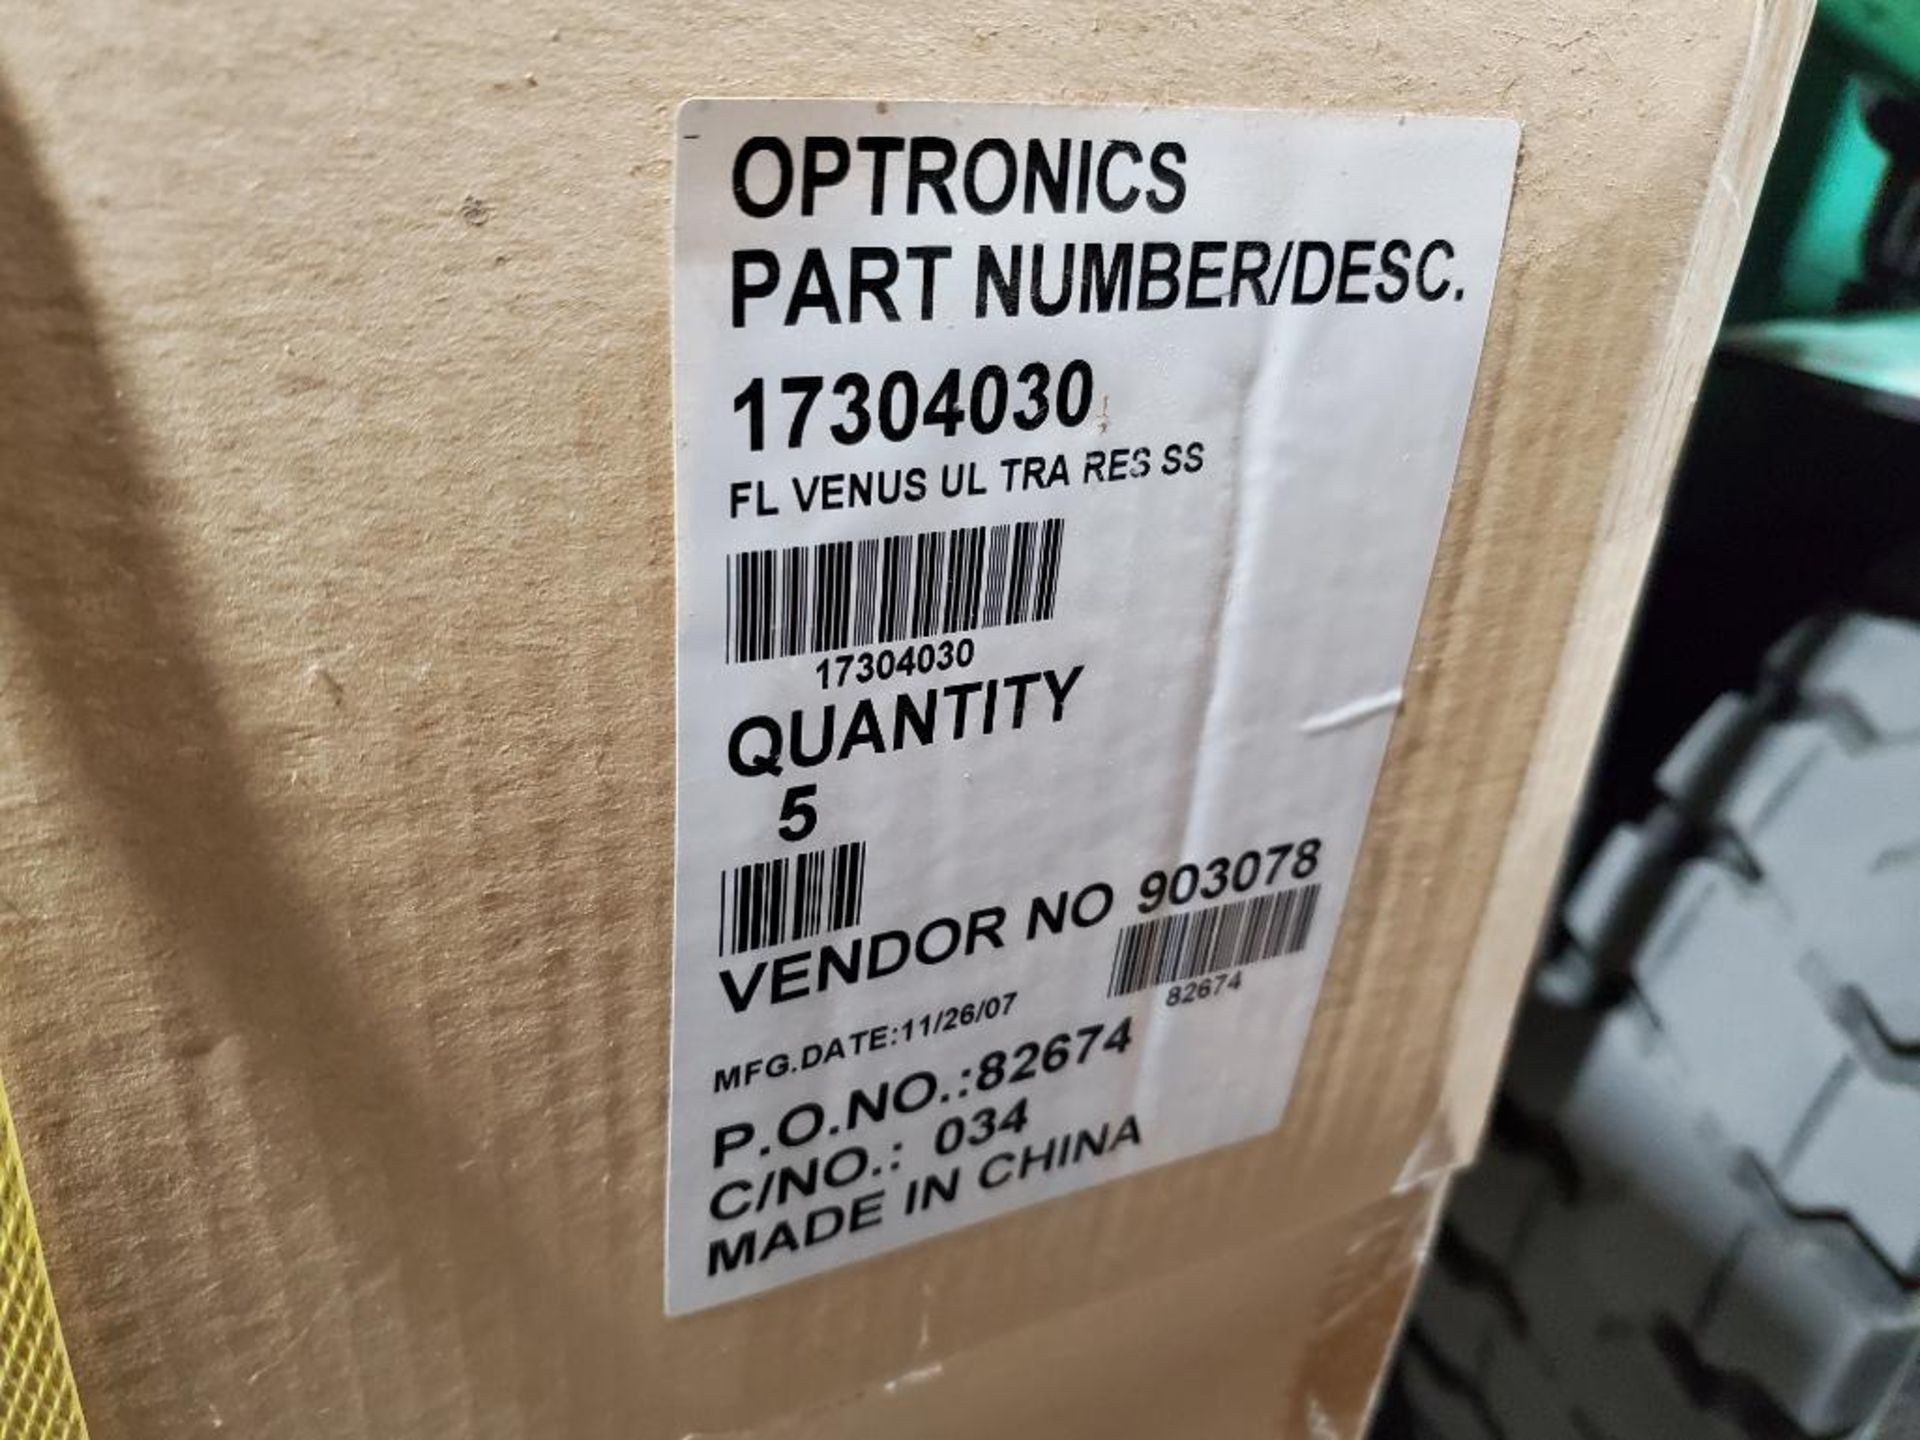 Qty 5 - Optronics light. Part number 17304030. - Image 5 of 5